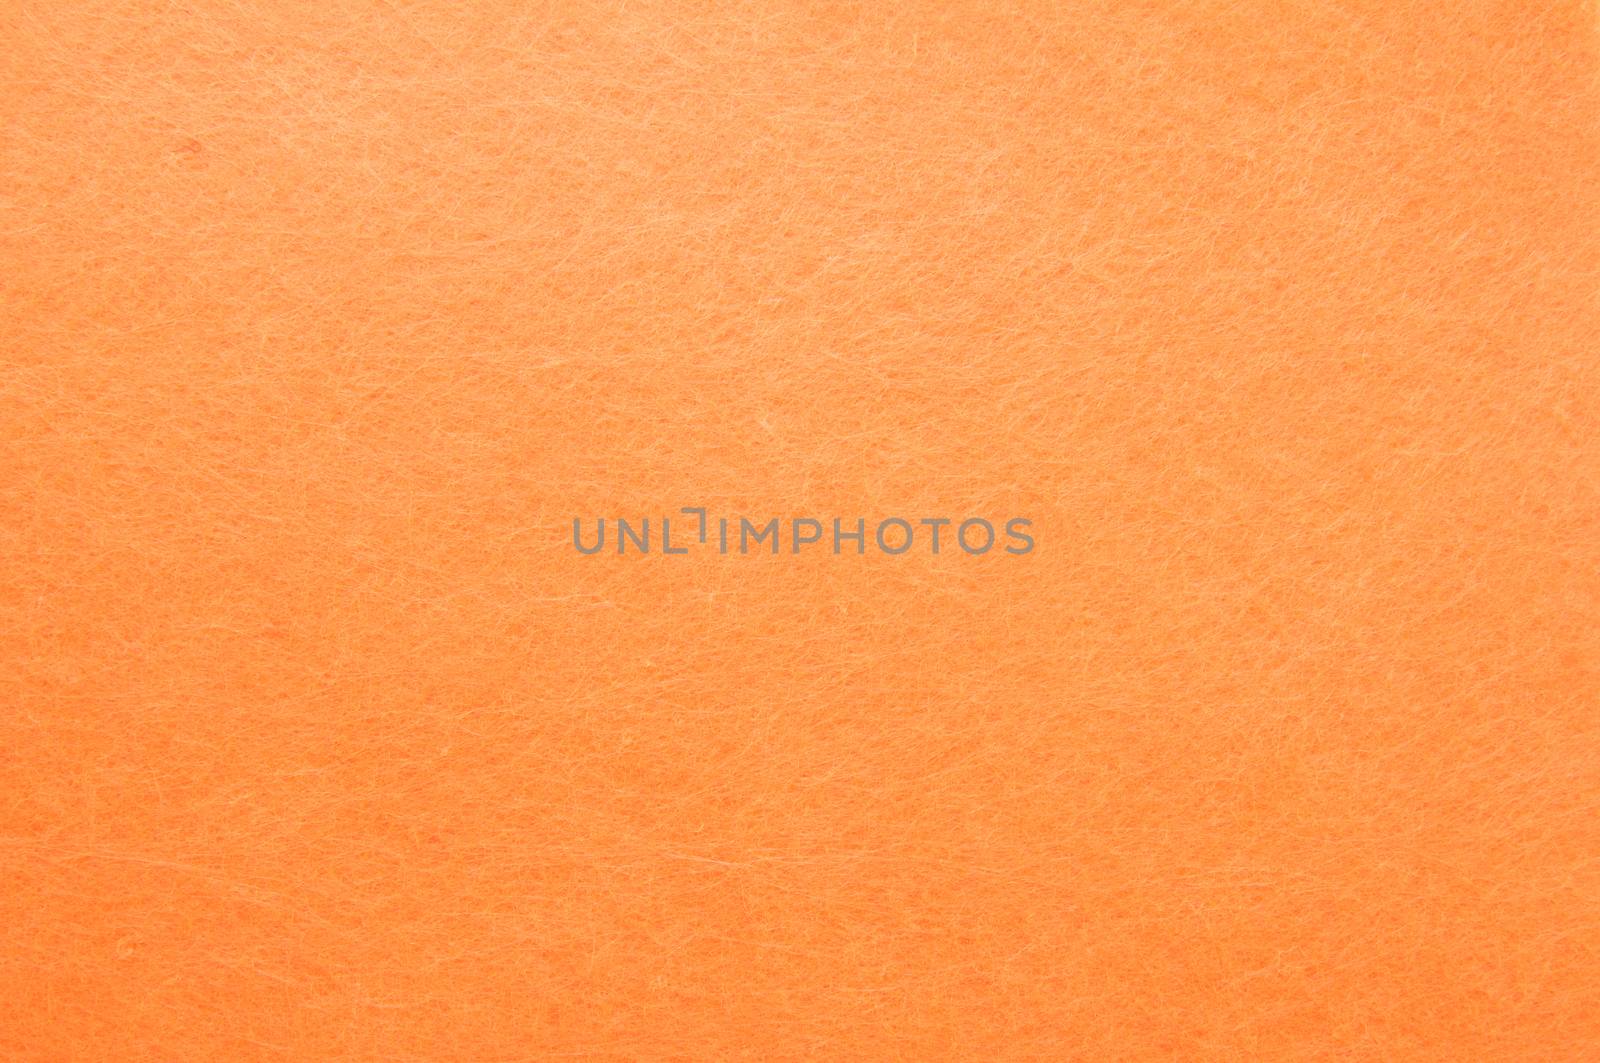 Texture background of Orange velvet or flannel by thampapon